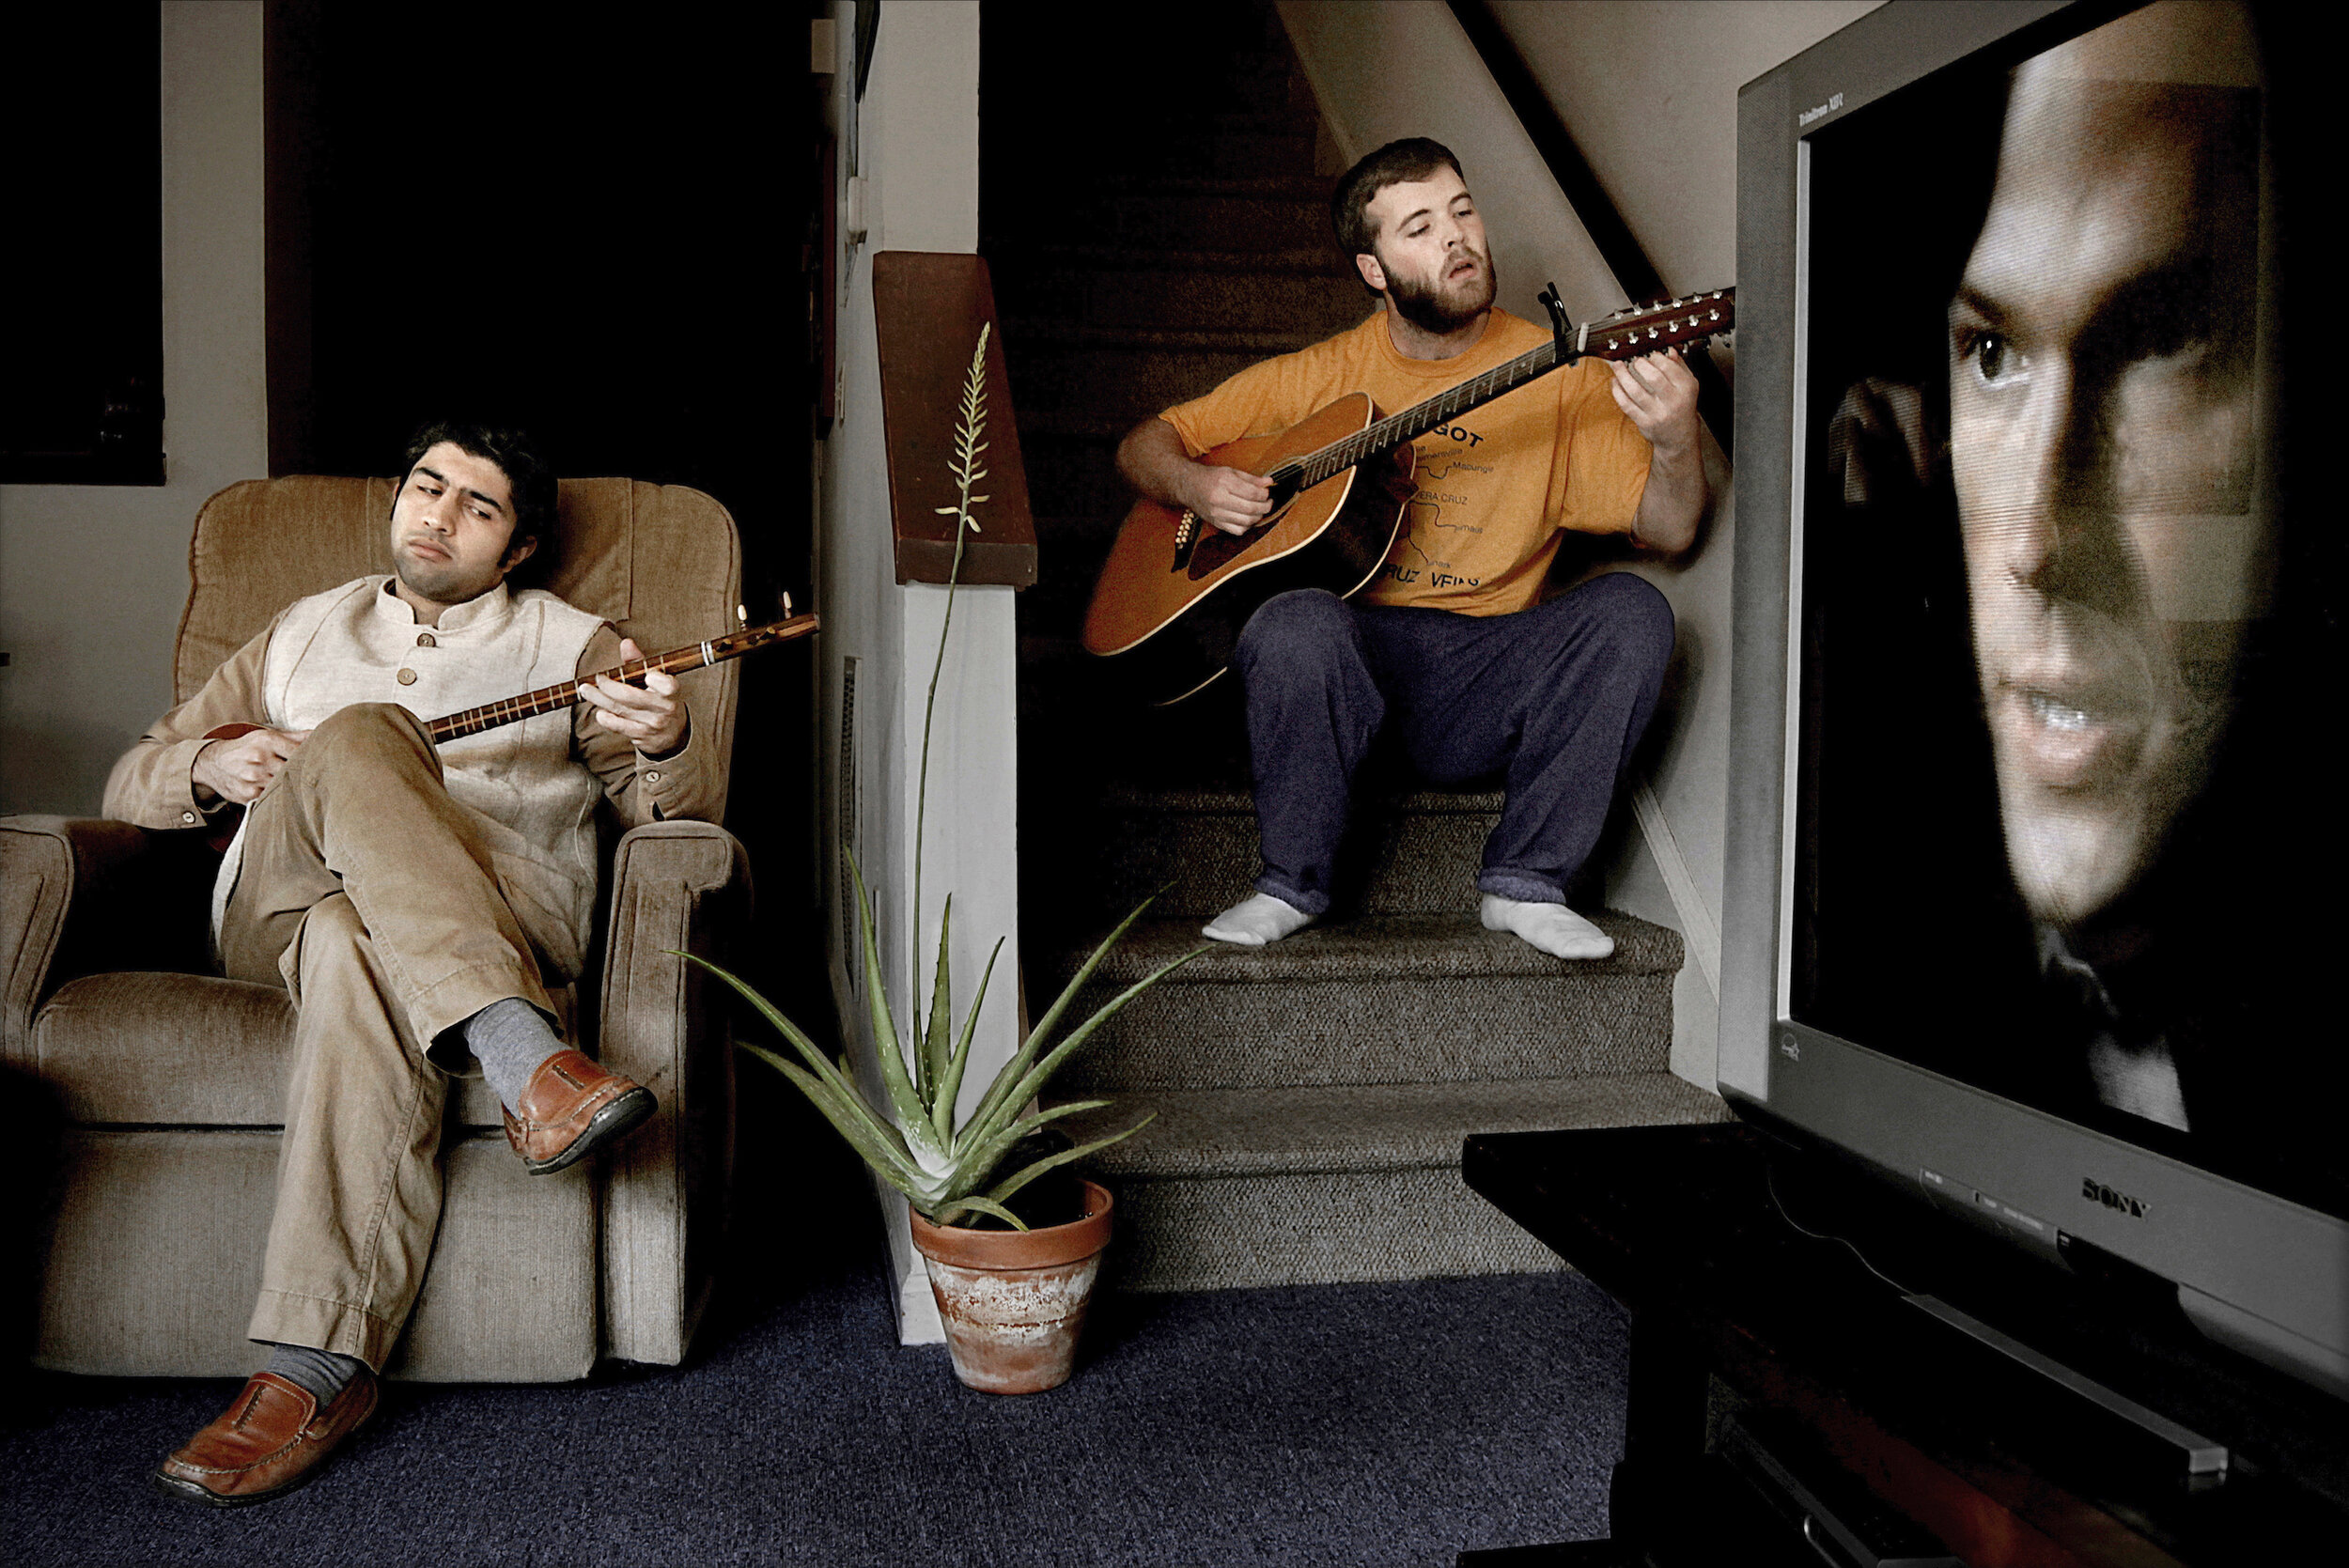   USA. Chapel Hill, NC. 2011. Ali Kadivar [left] plays a setar as his friend, Lukas Sherry, joins him at their apartment. Ali, an Iranian, said, “The image that the Western media presents of Iran, as conservative, backward, and homogeneous, is distor